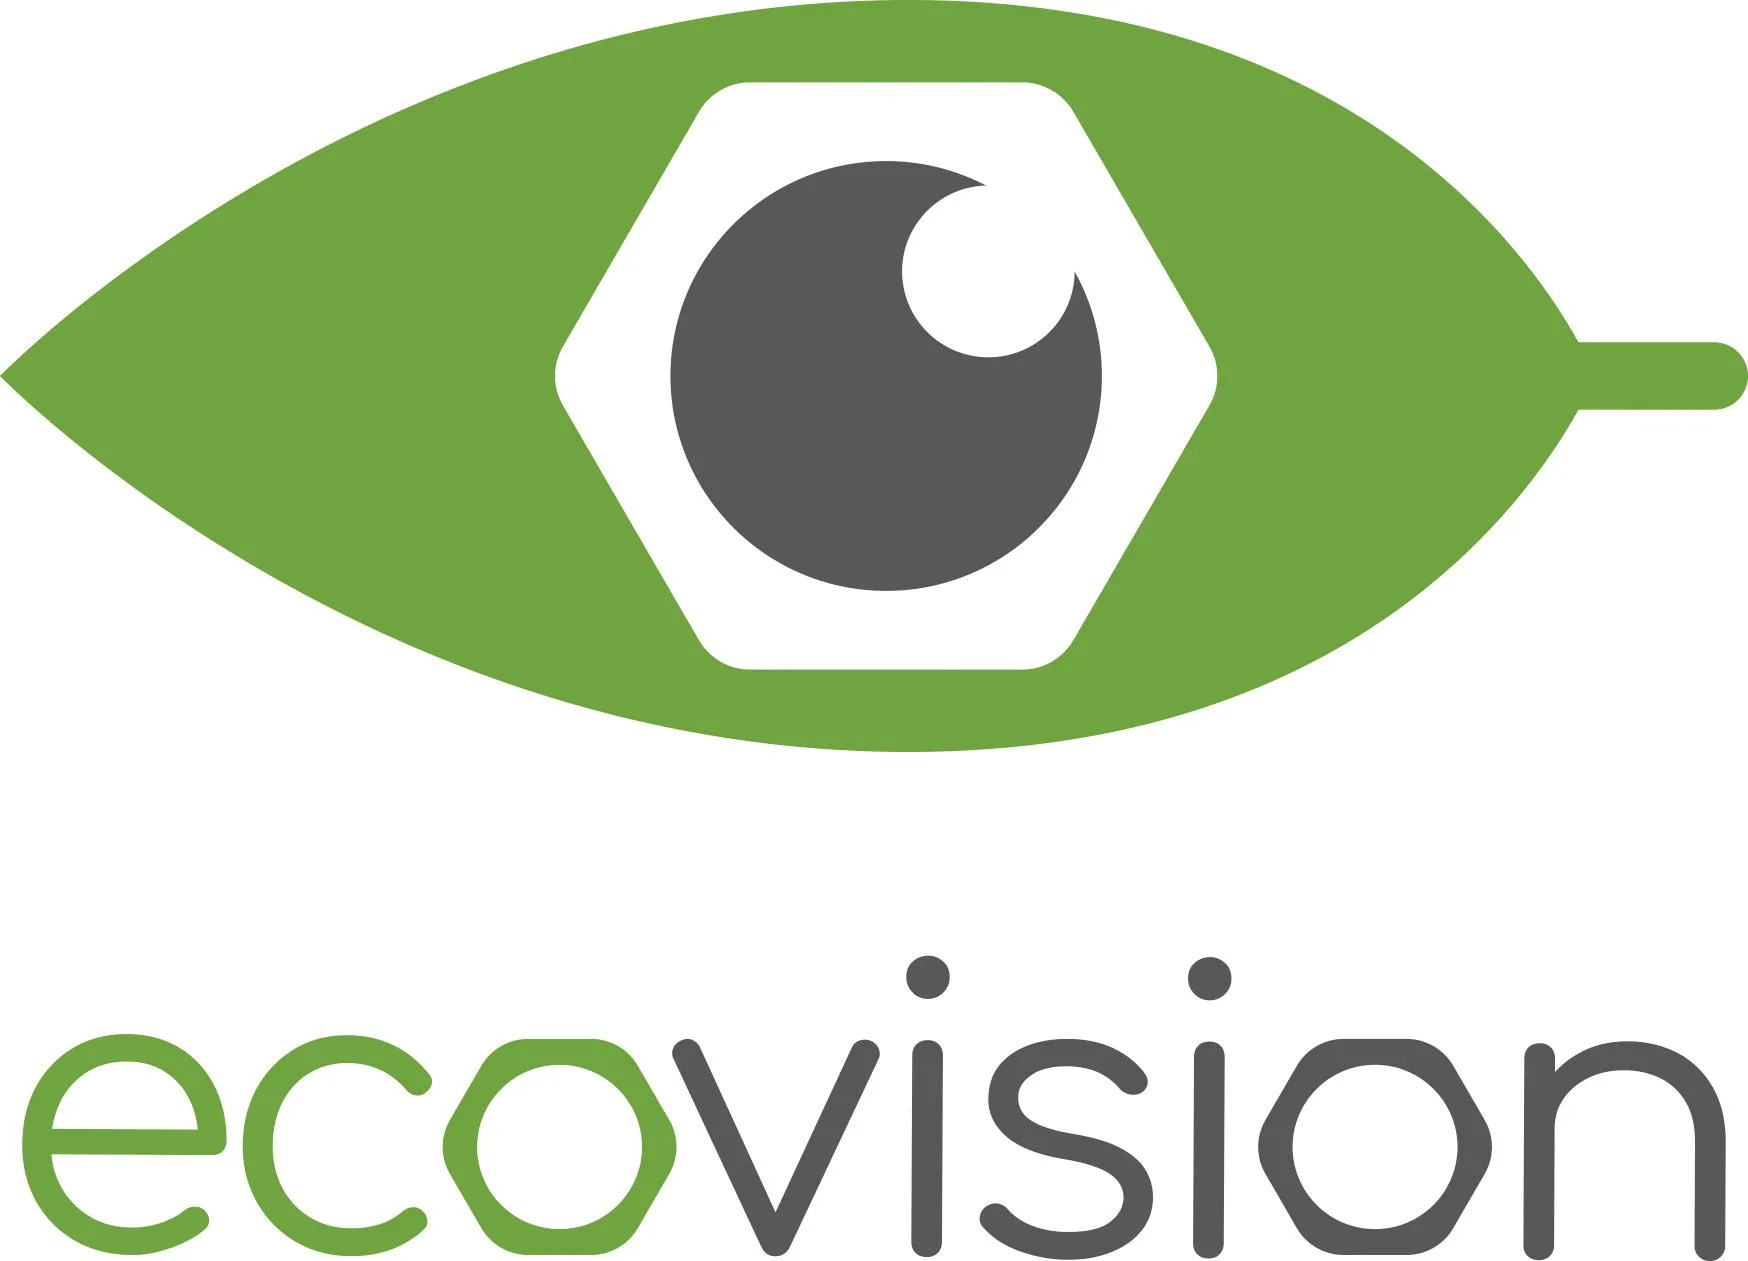 17-facts-about-ecovision